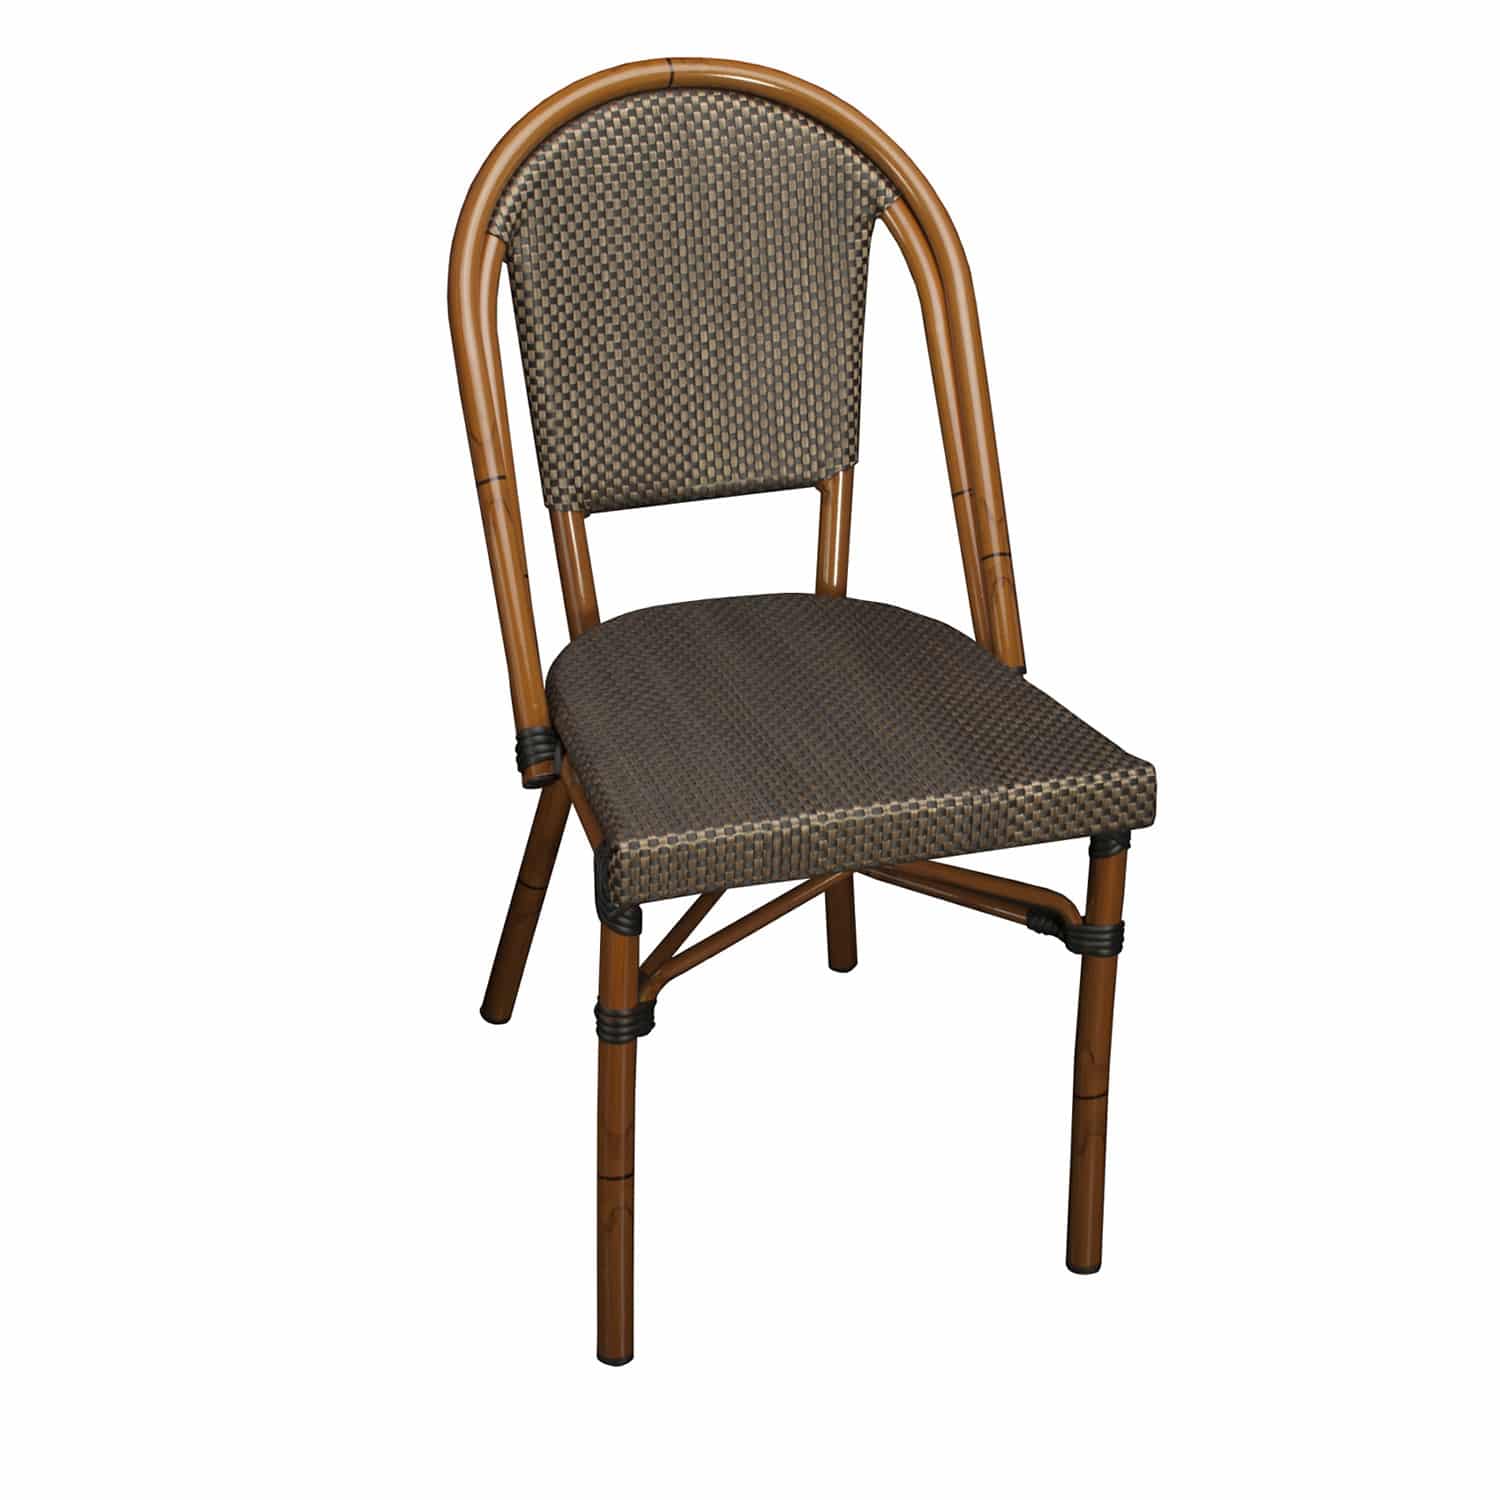 Textiline Bistro Chairs - Outdoor Chairs | Cafe Tables Inc